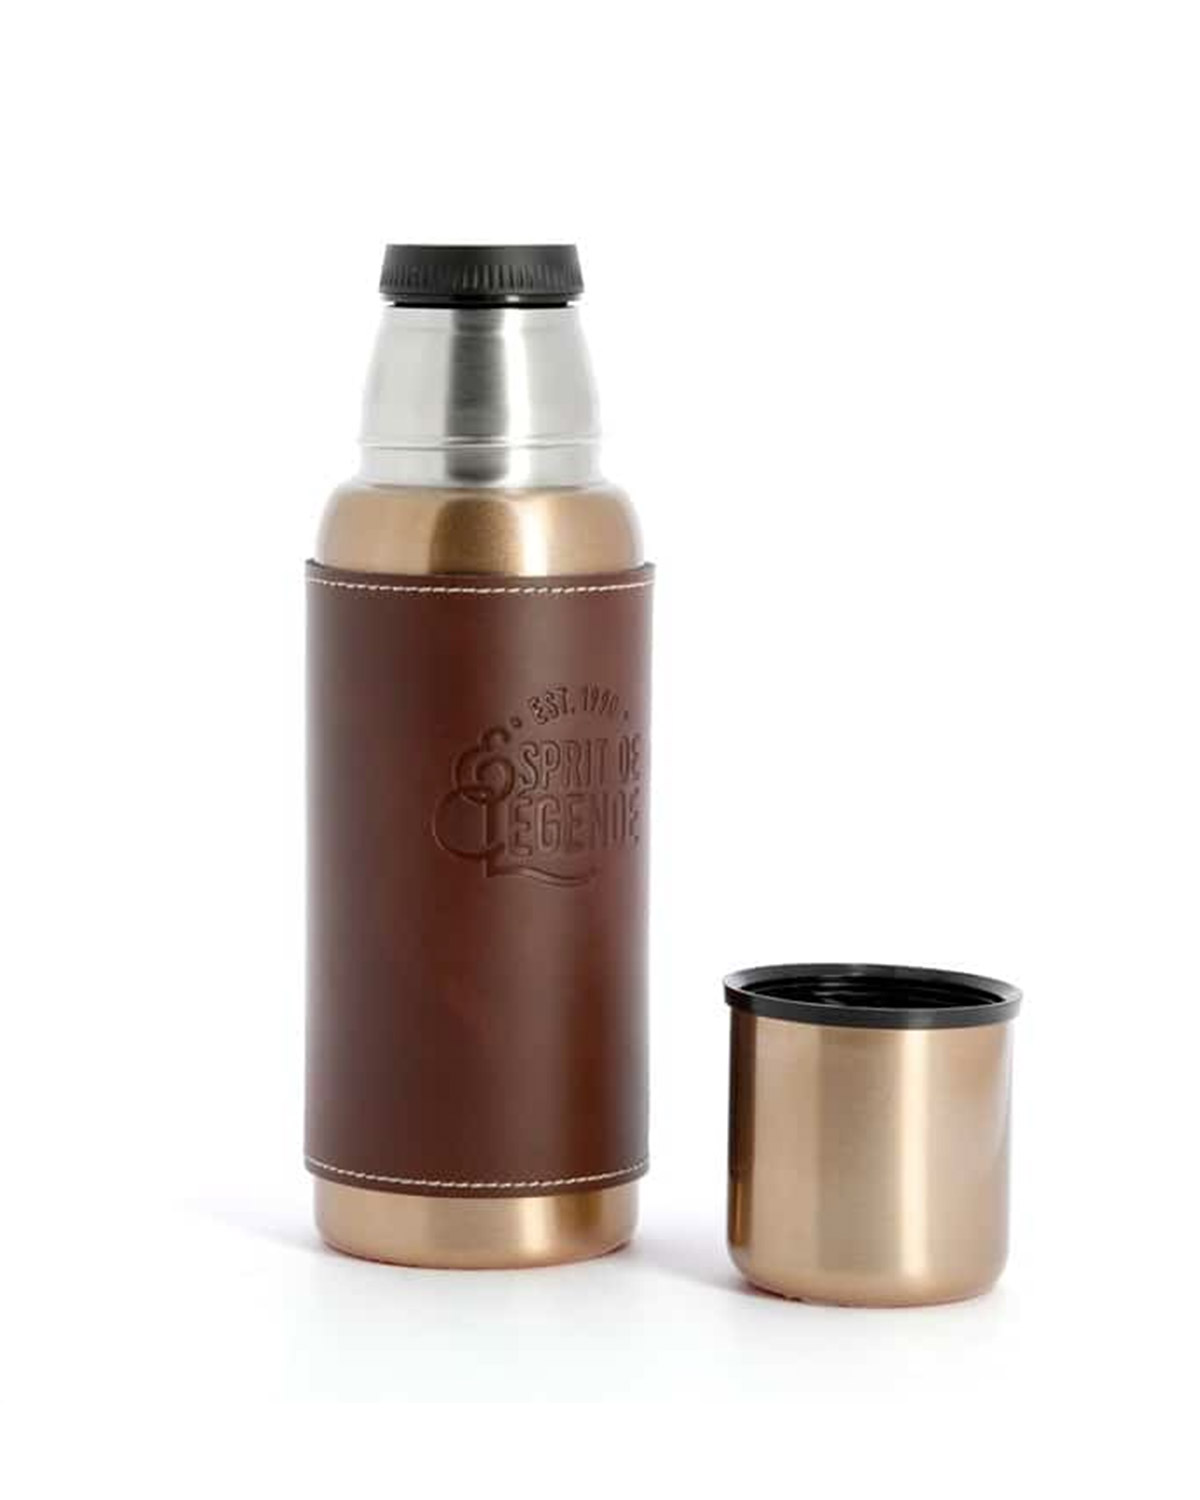 Nomad bouteille isotherme inox